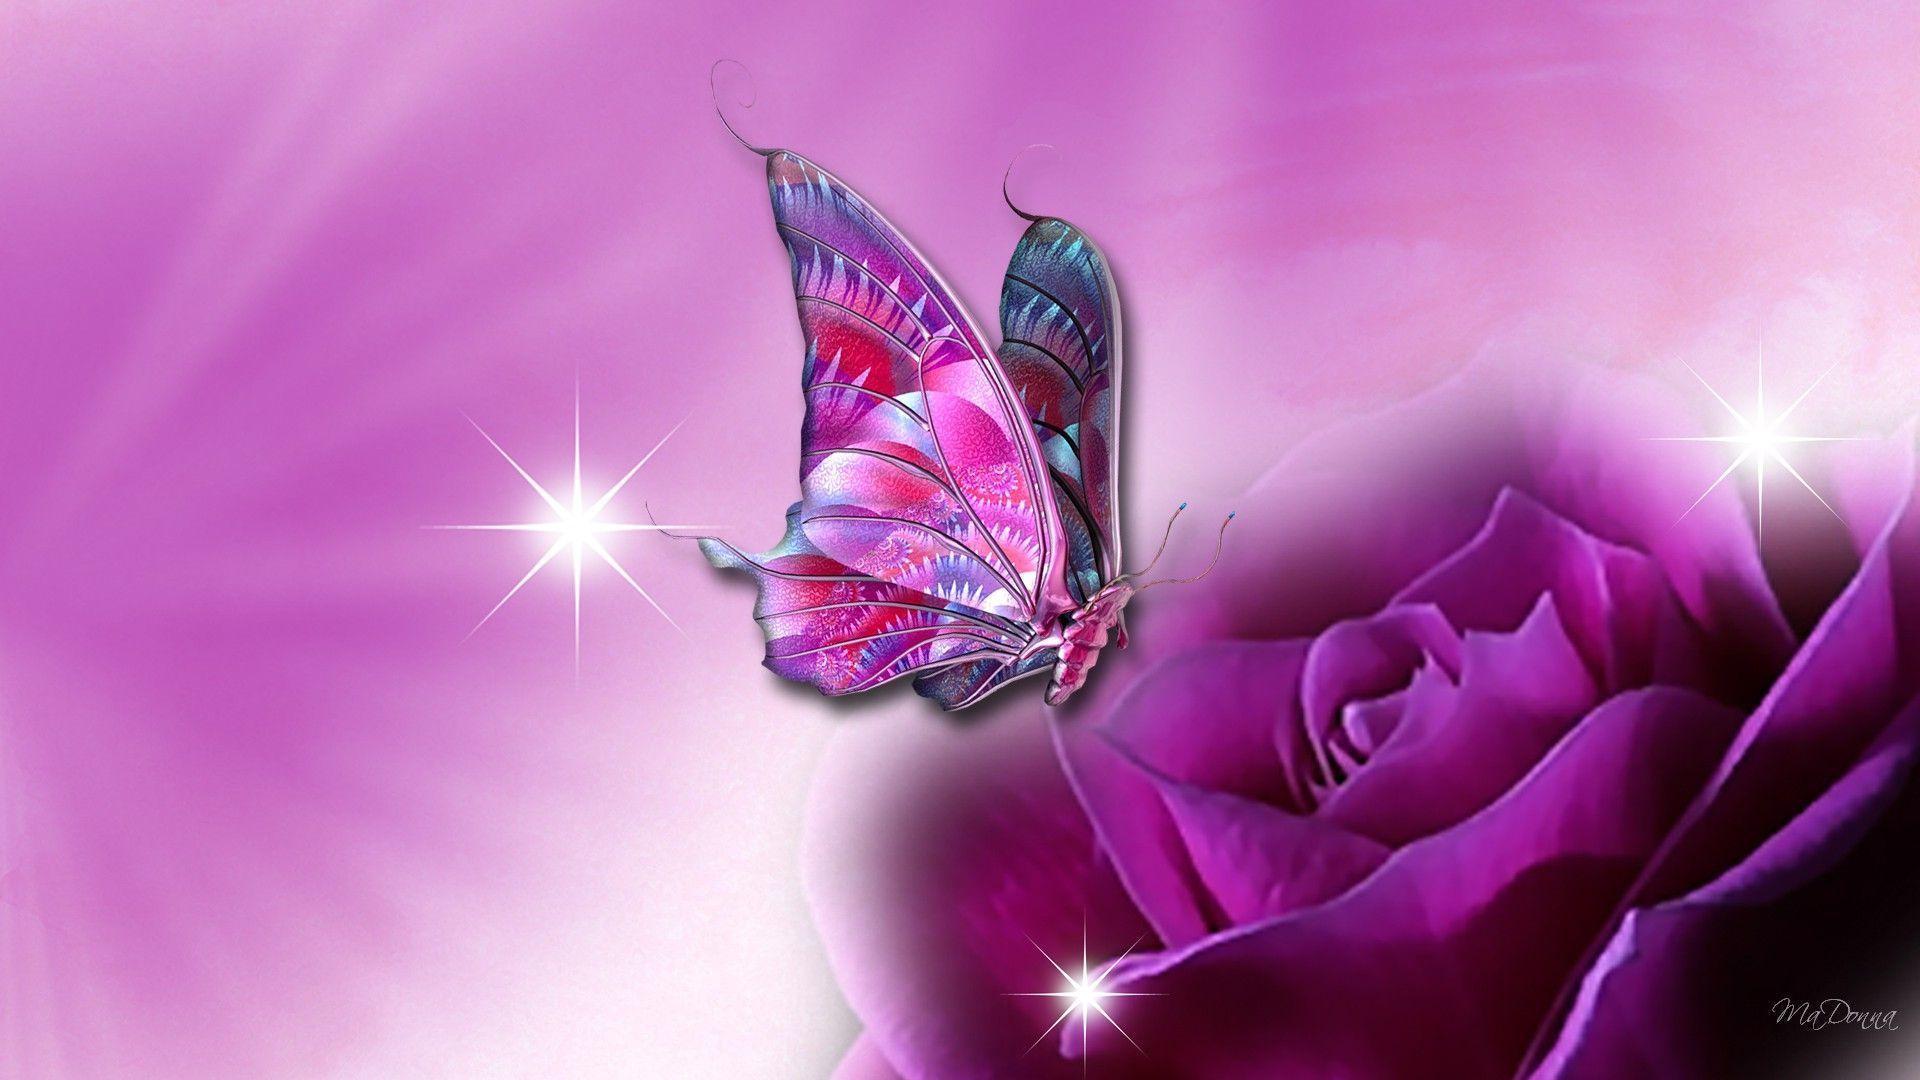 Download Awesome 3D Butterfly Wallpaper For Laptop. HD Wallpaper